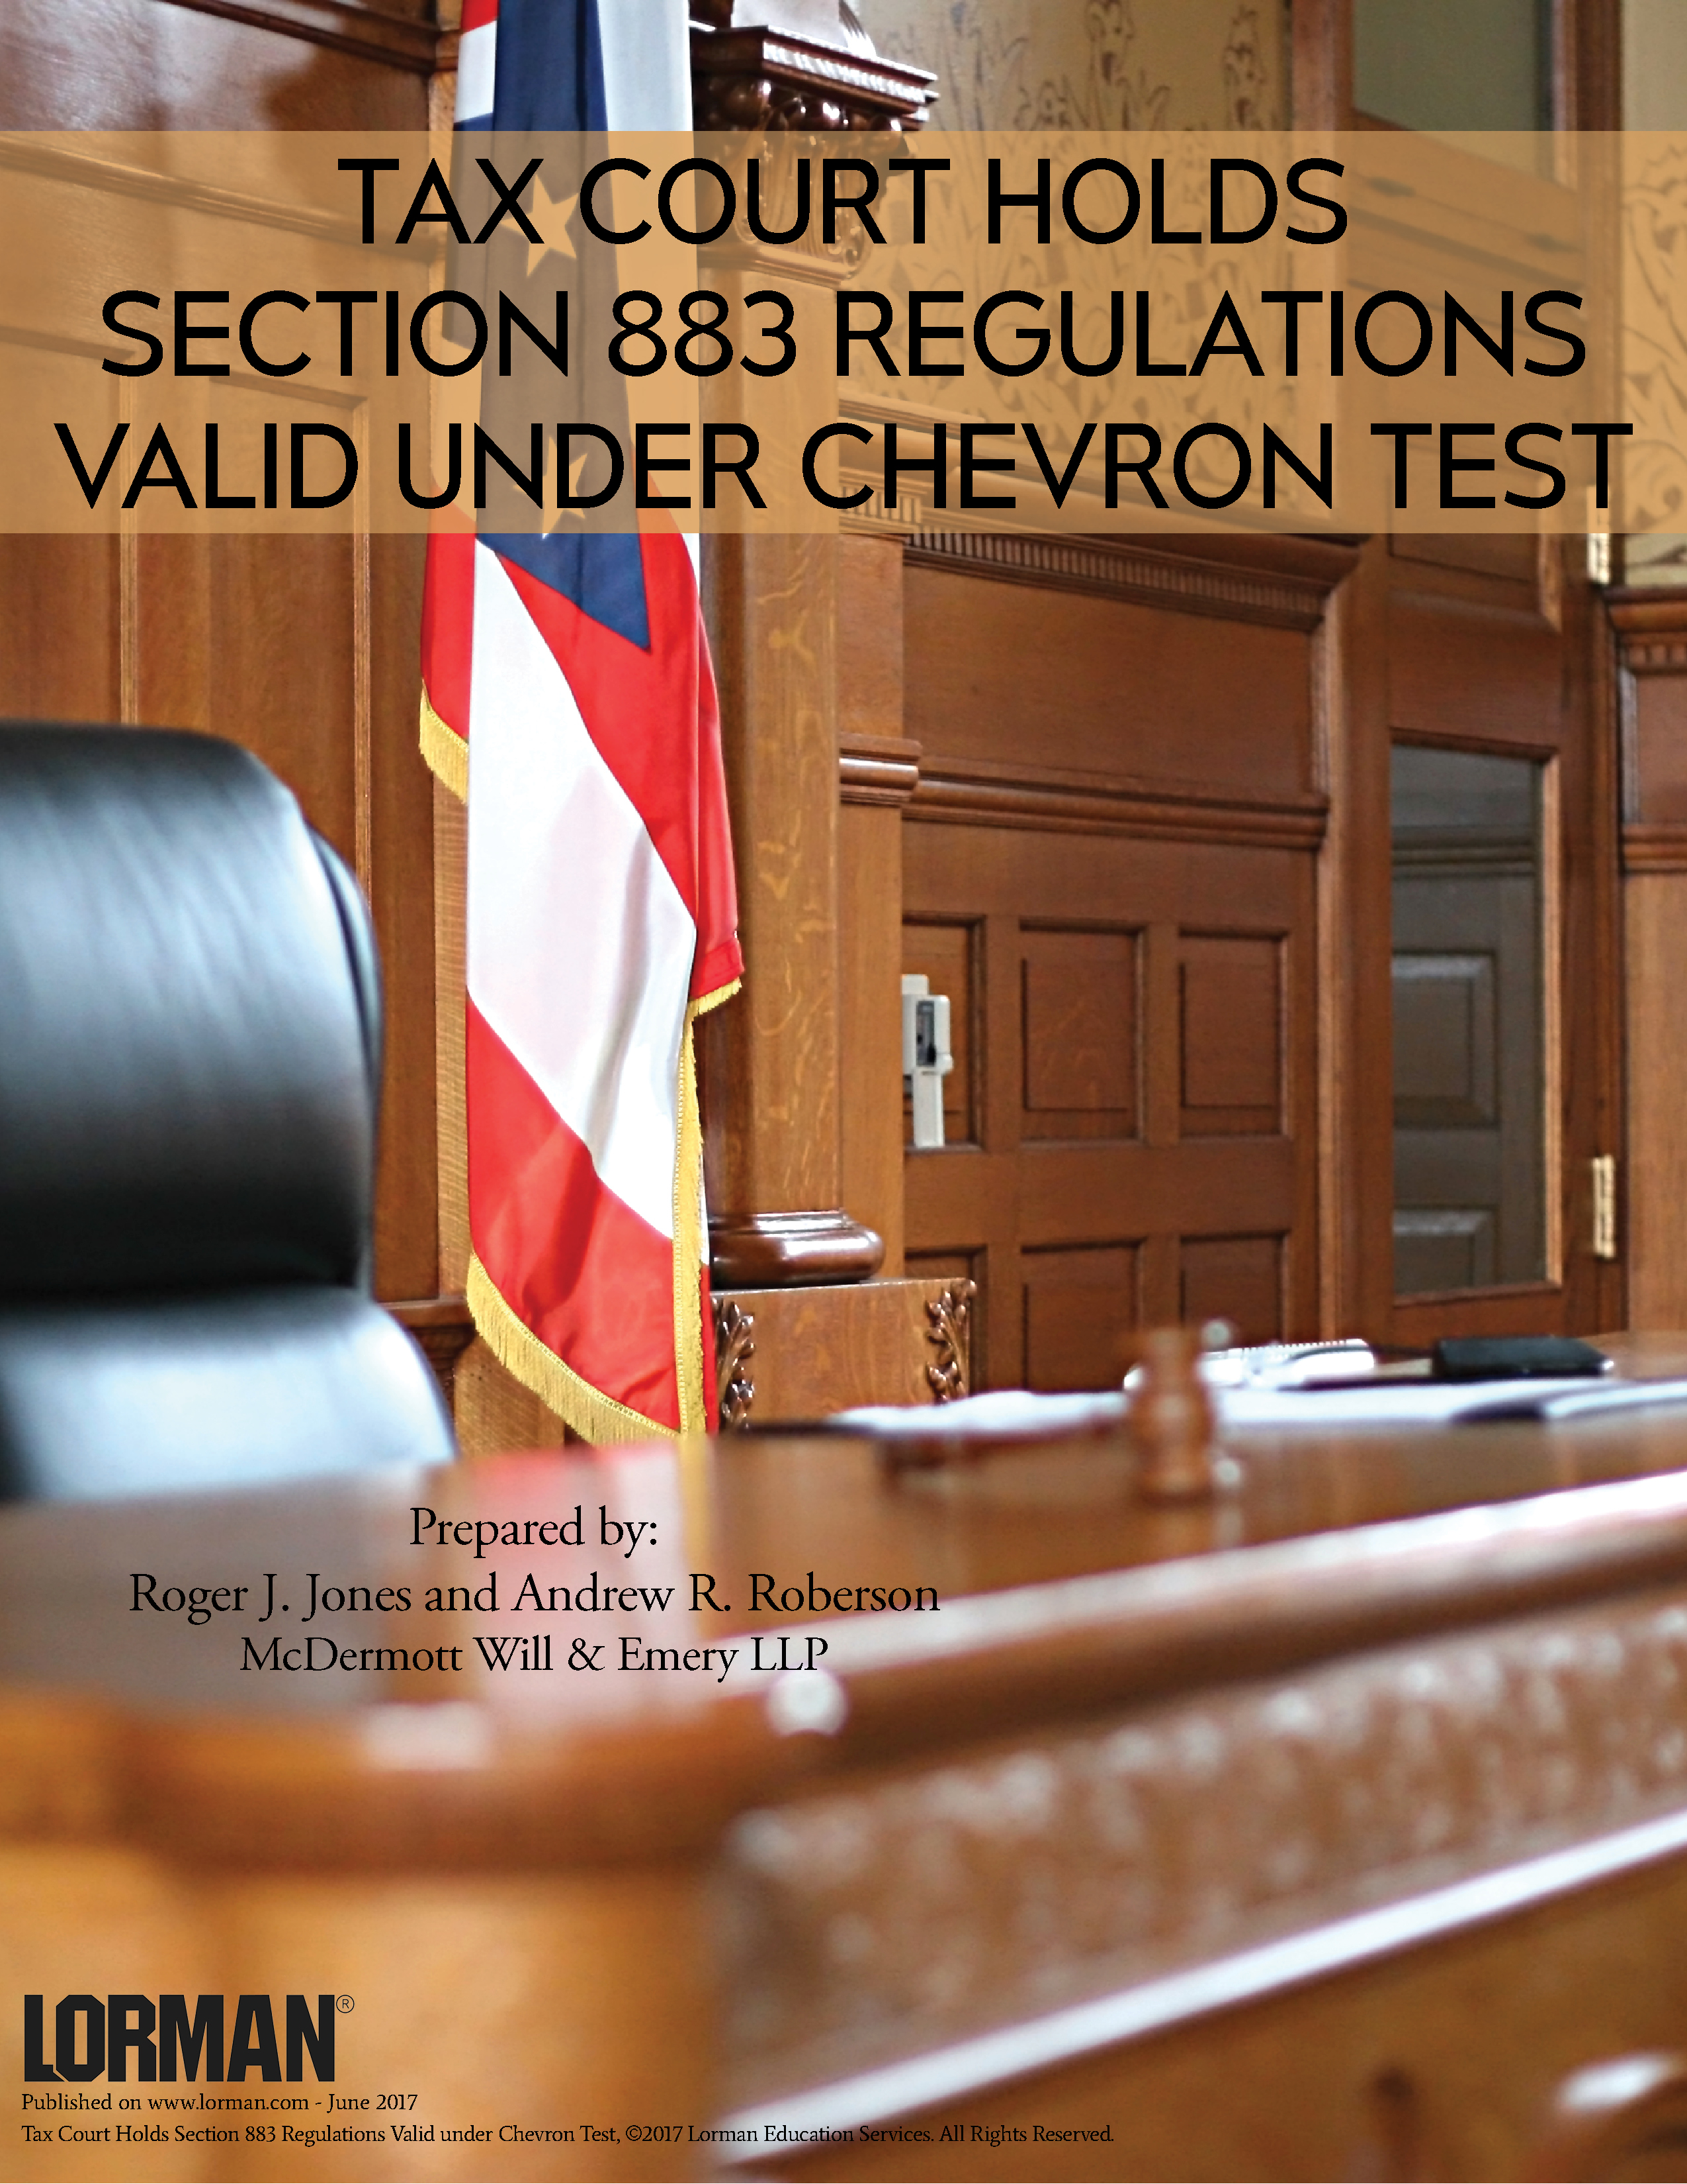 Tax Court Holds Section 883 Regulations Valid under Chevron Test